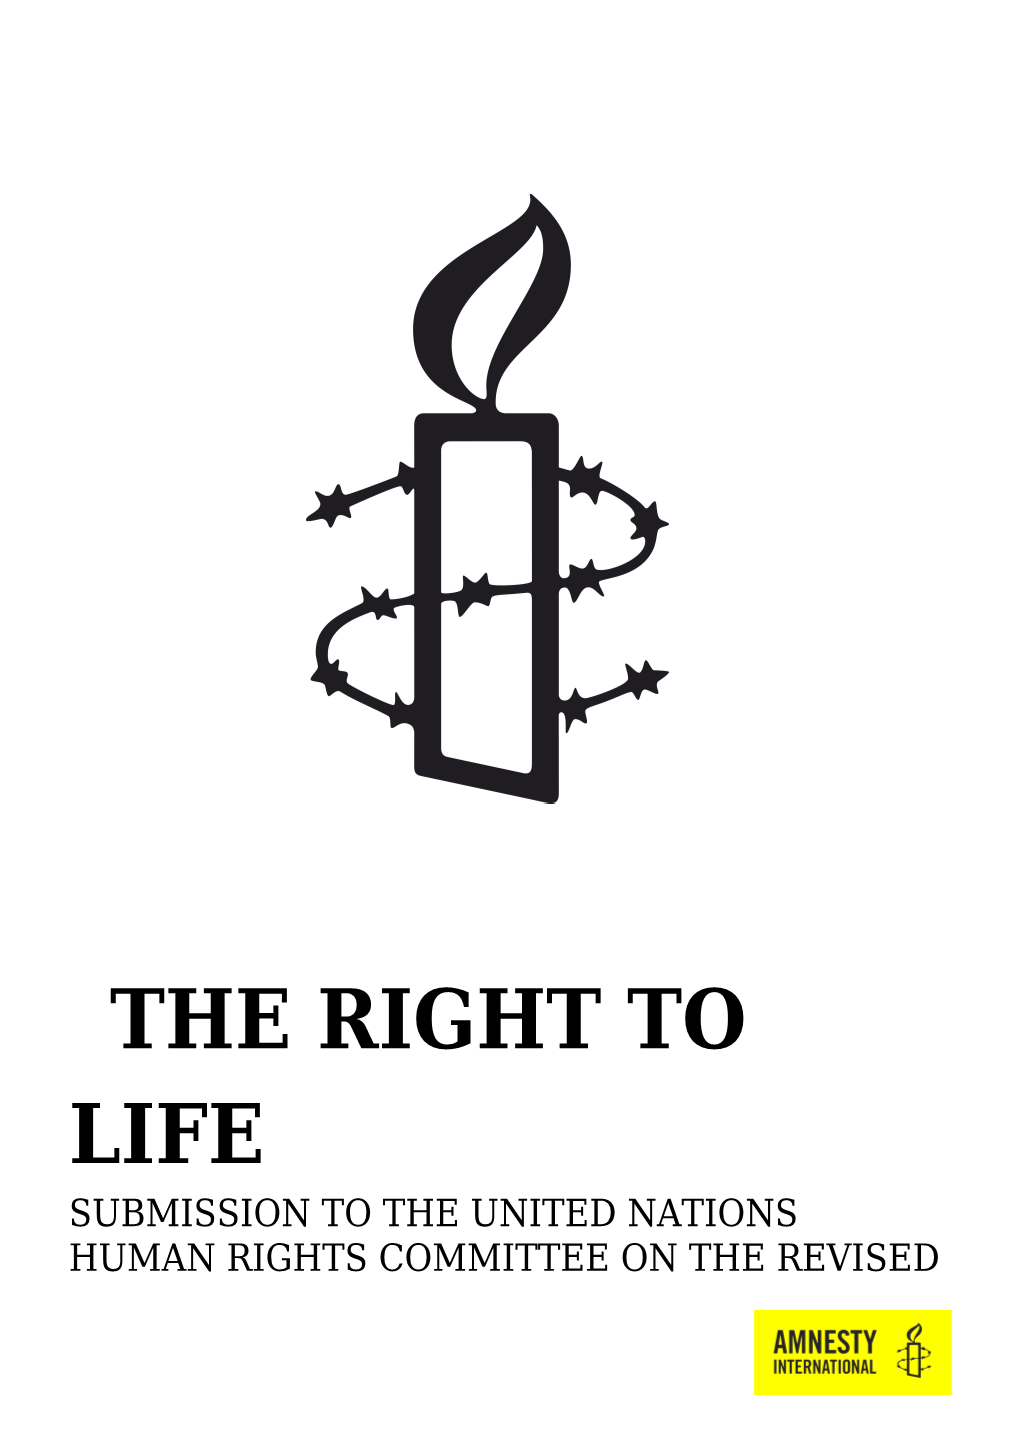 Submission to the UNITED NATIONS Human Rights Committee on the Revised Draft General Comment